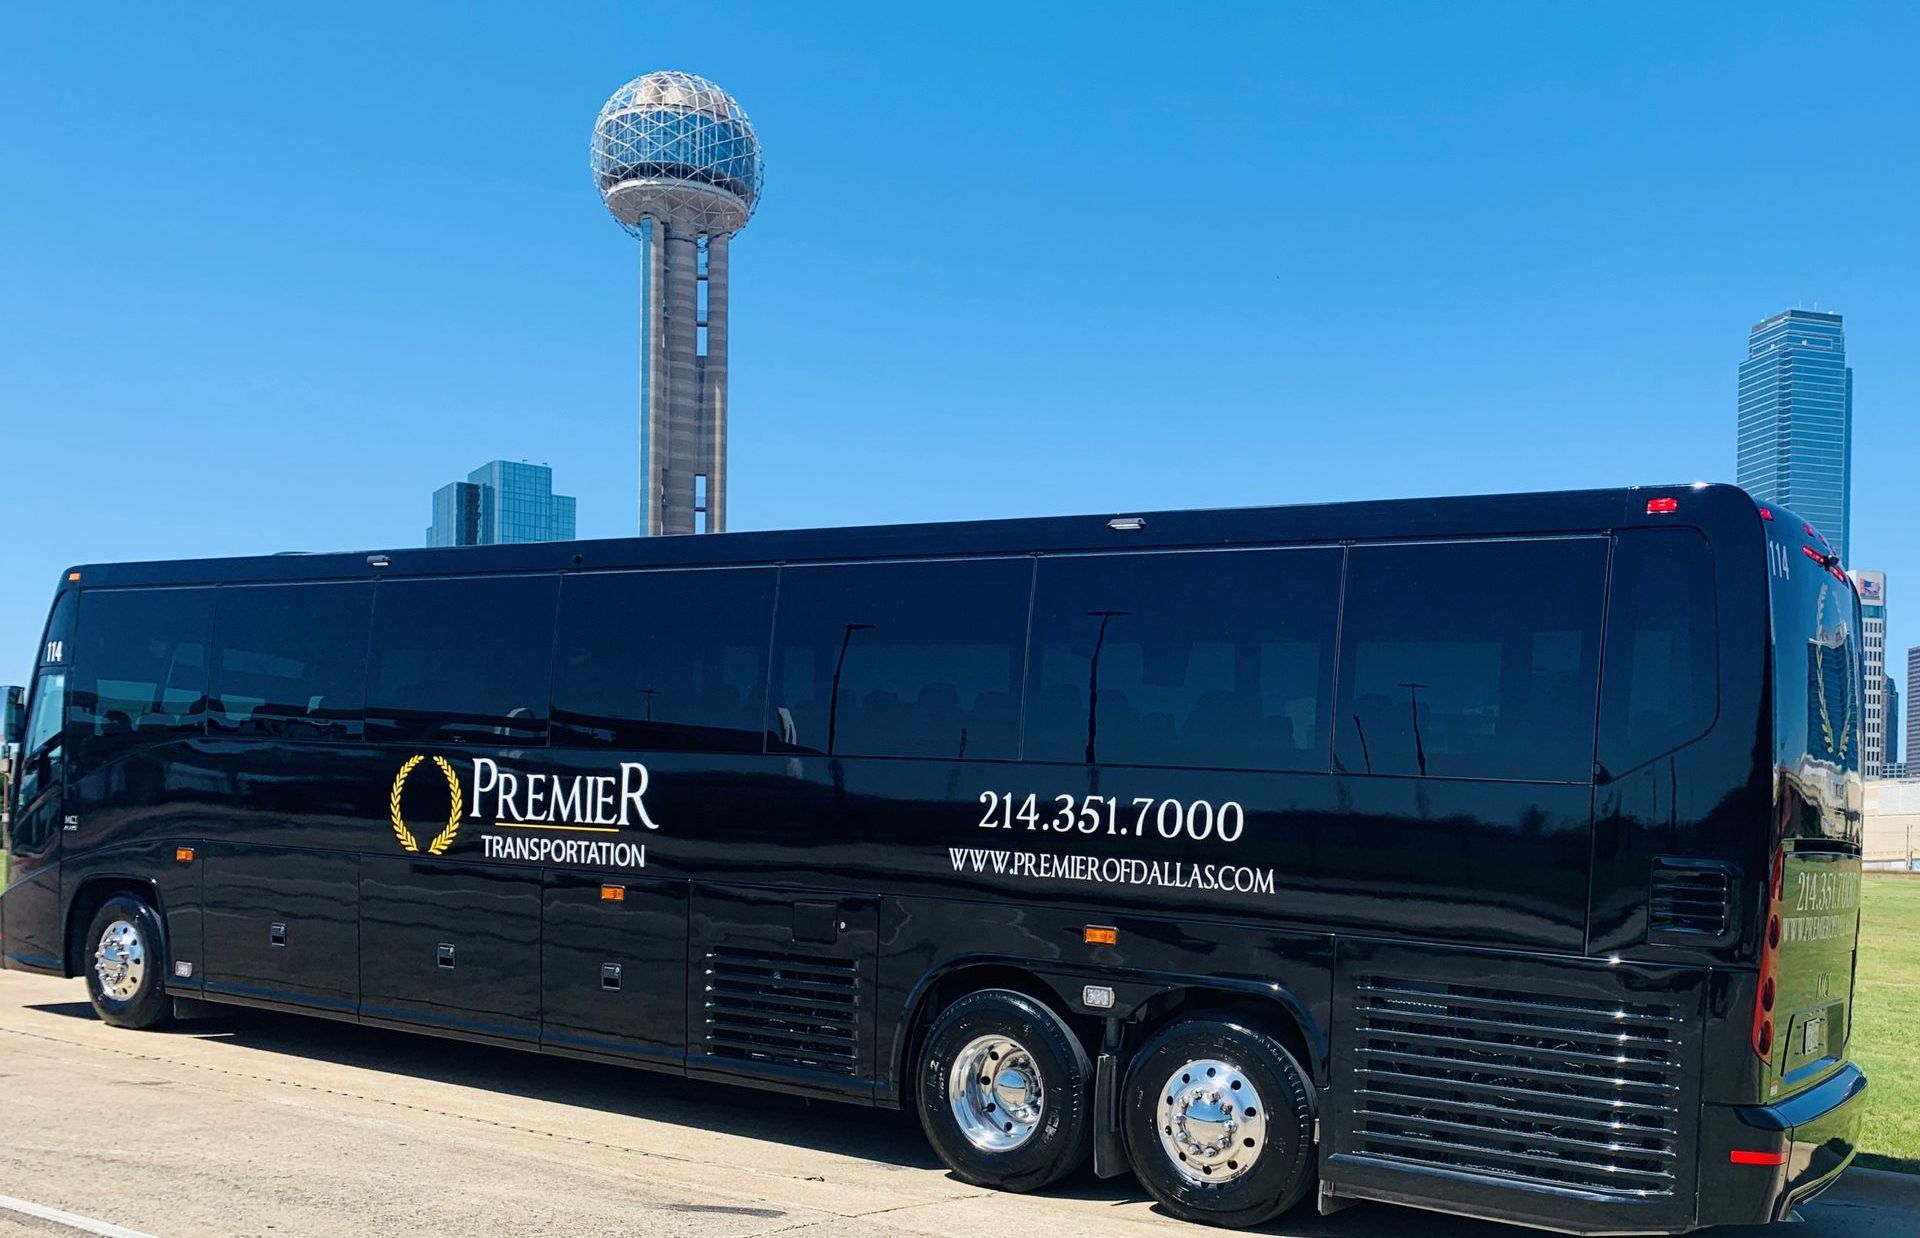 premier's black bus is parked in front of a tall building